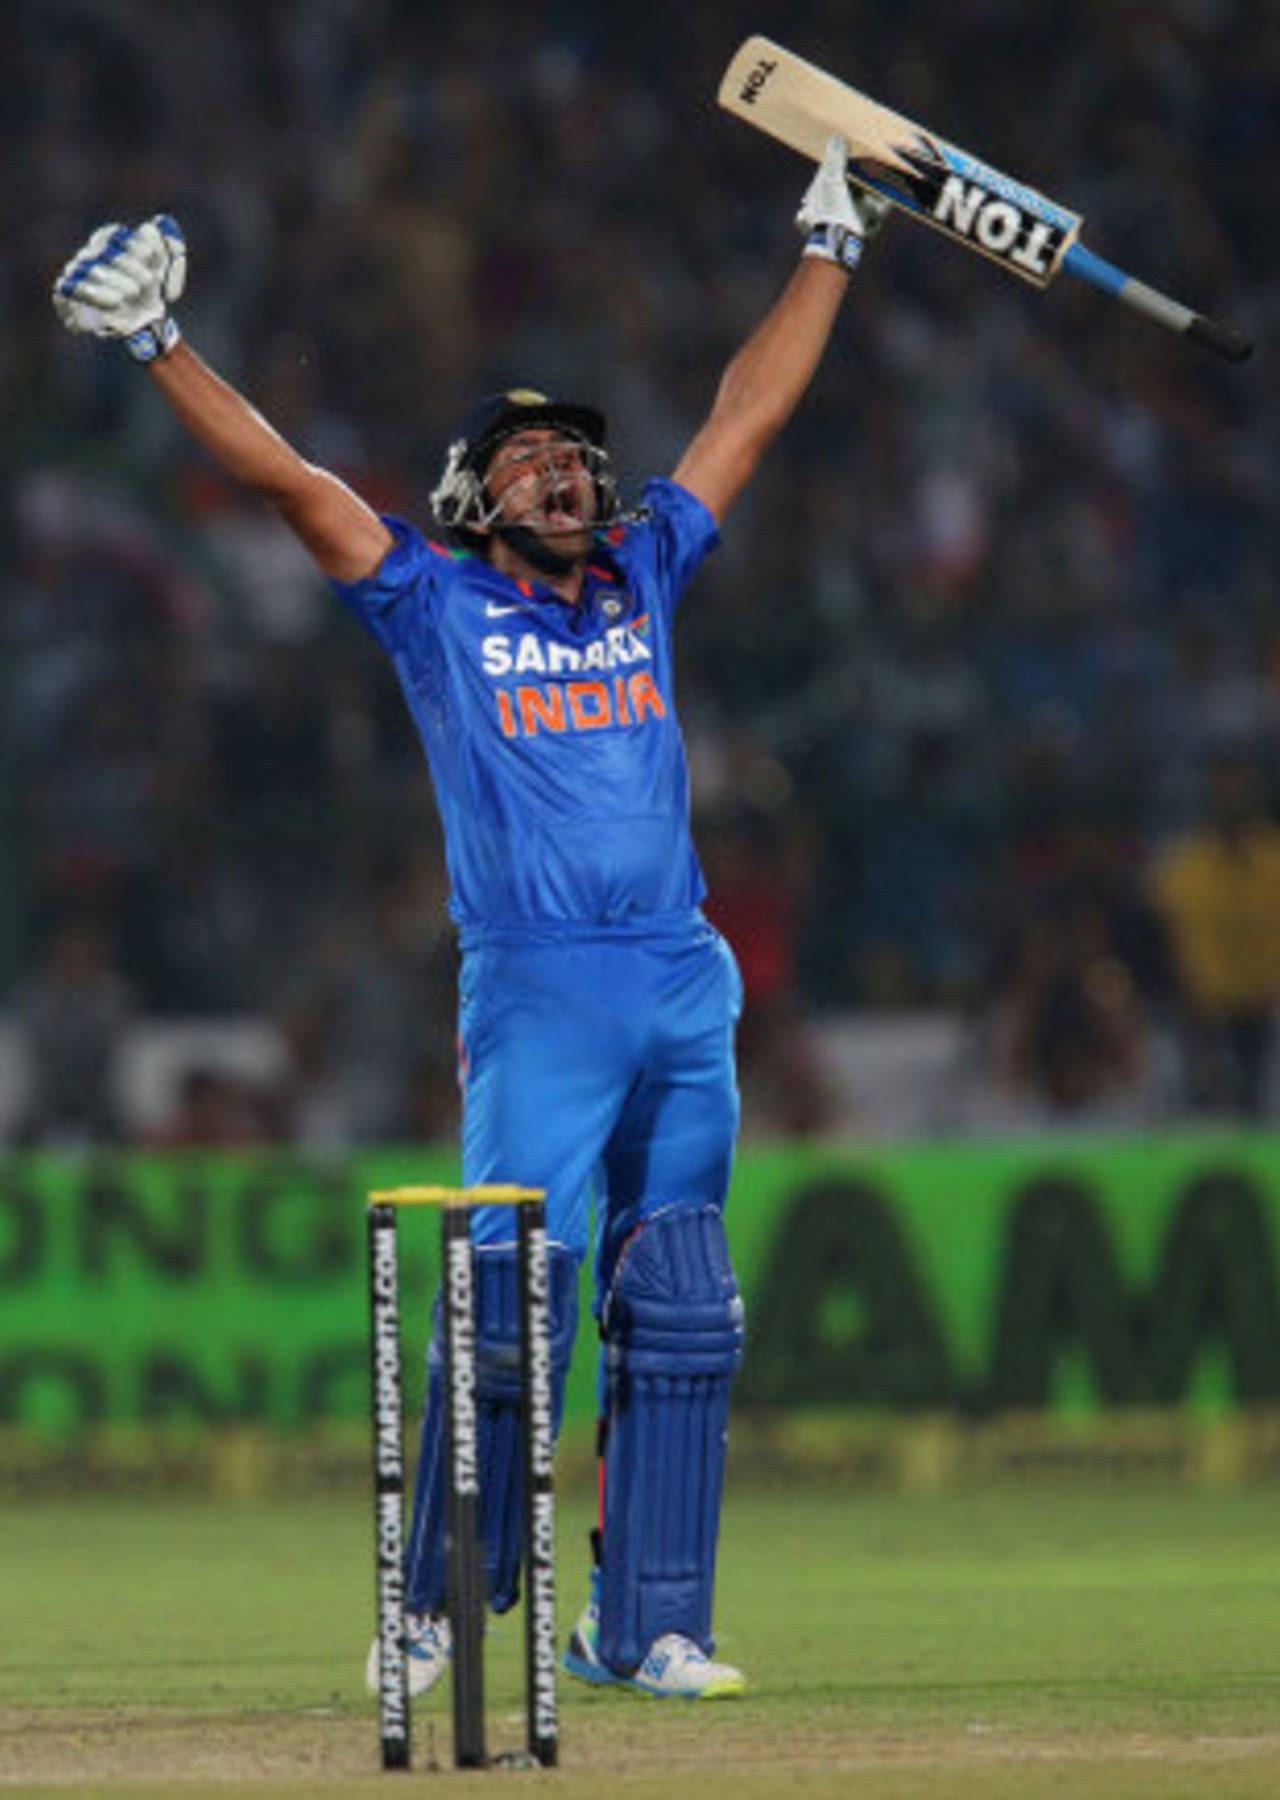 Rohit Sharma is elated after scoring his first century in three years, India v Australia, 2nd ODI, Jaipur, October 16, 2013